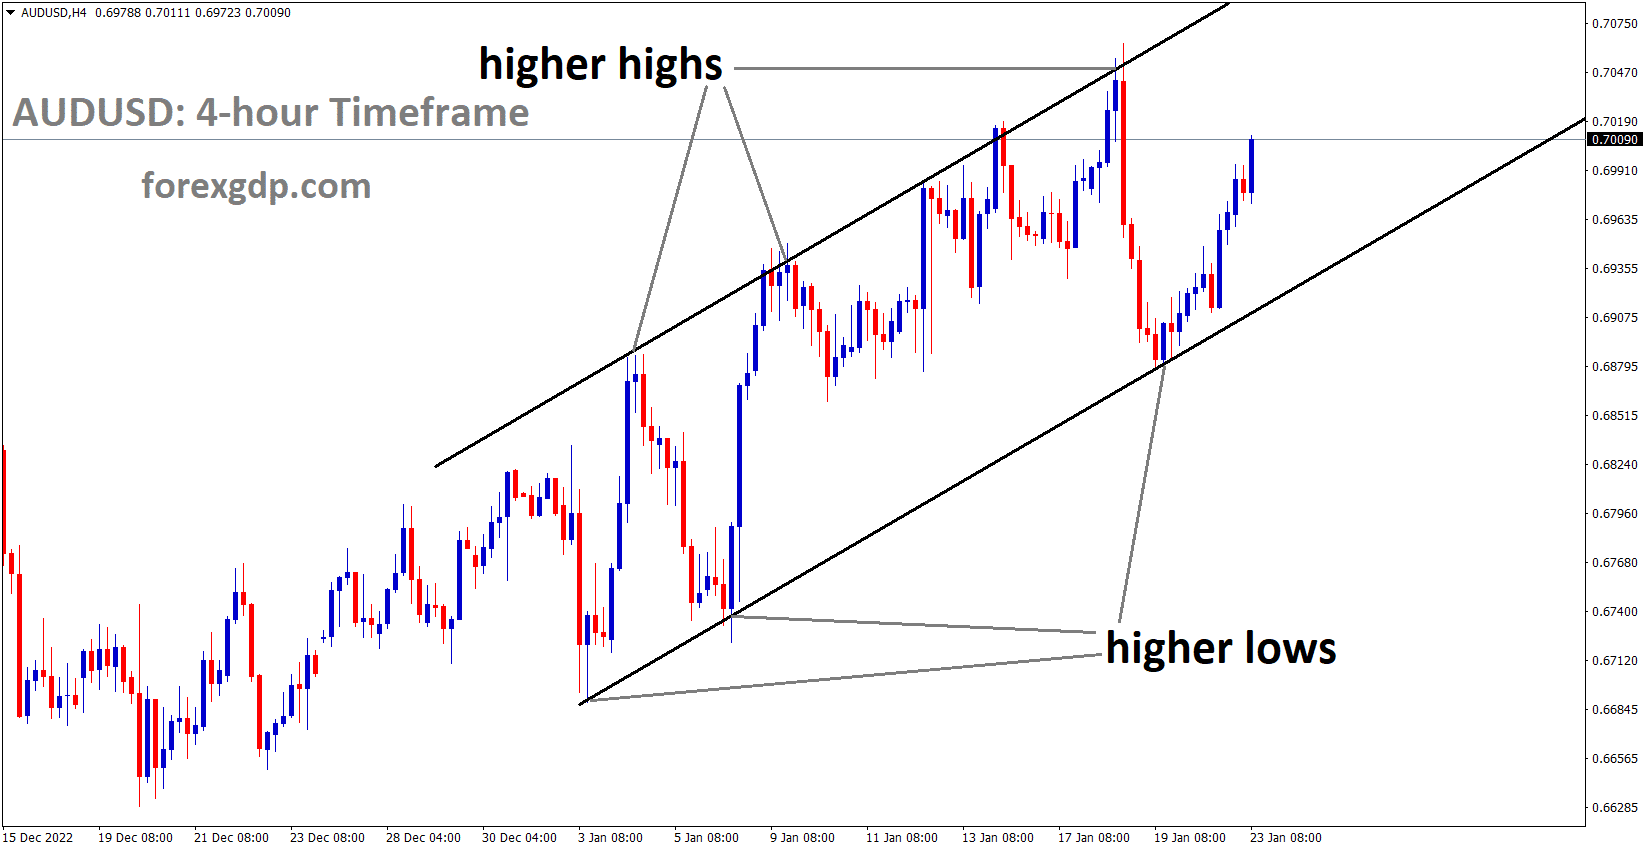 AUDUSD is moving in an Ascending channel and the market has rebounded from the higher low area of the channel 1